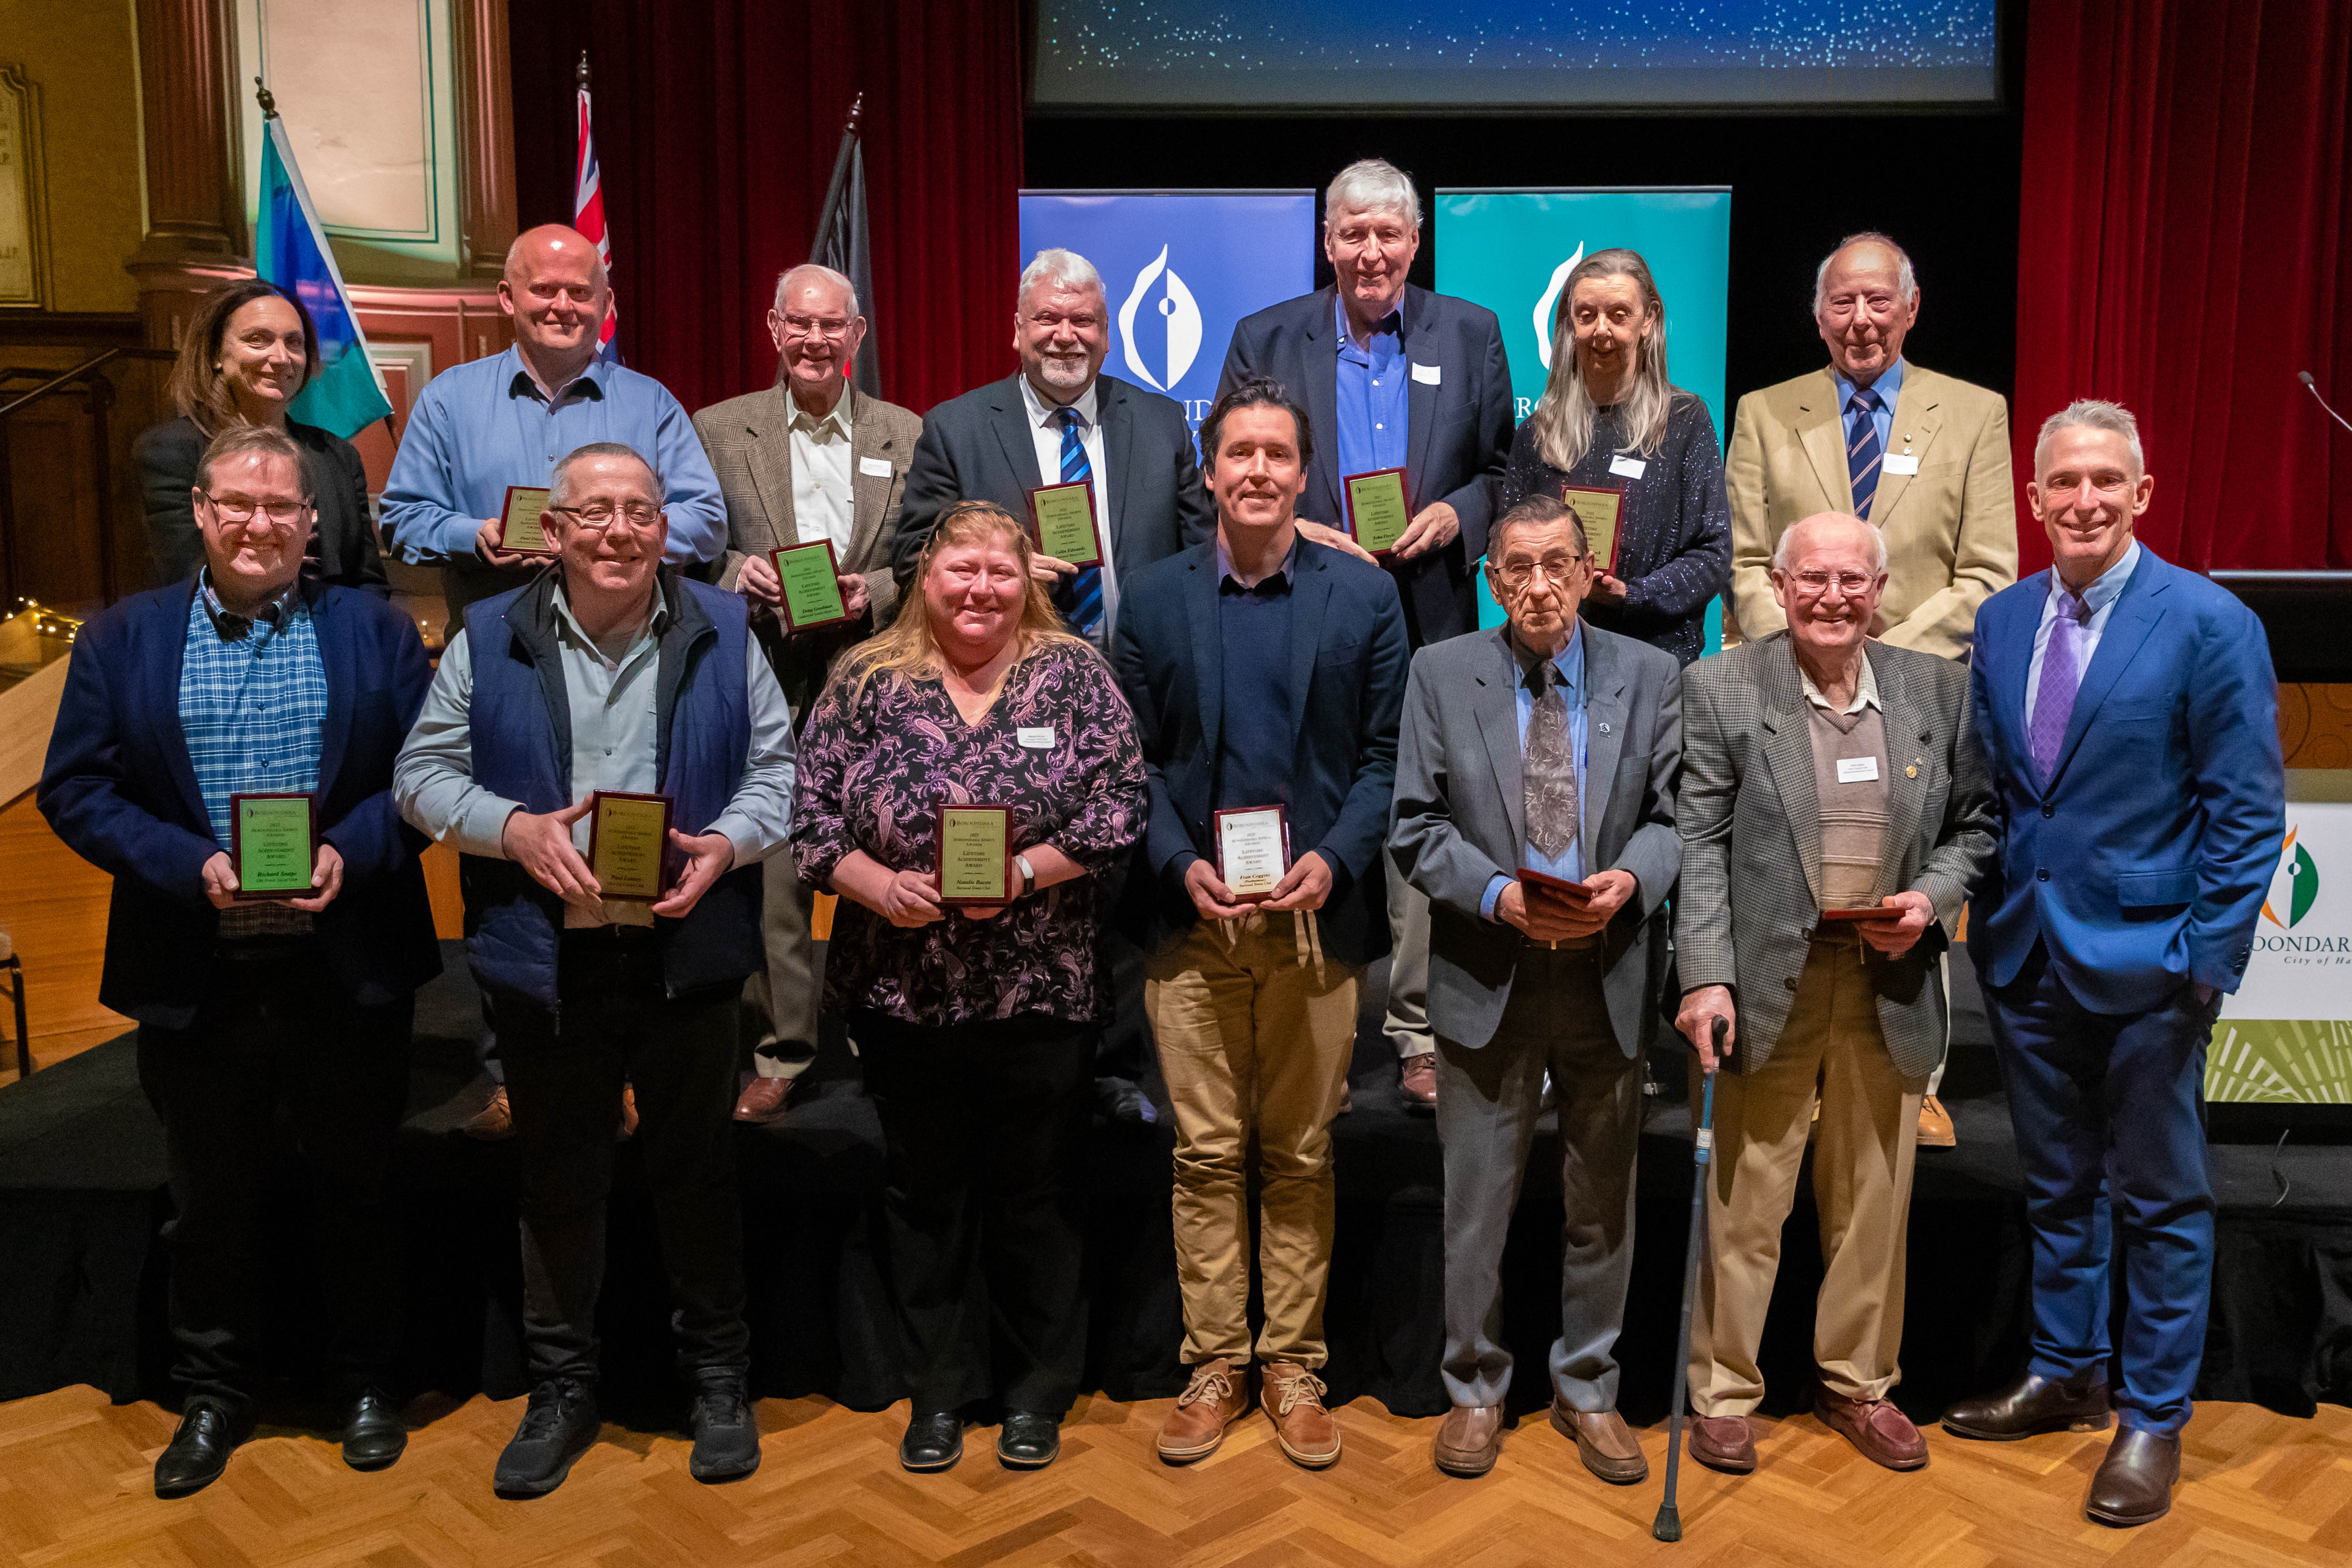 14 people standing in 2 rows holding plaques